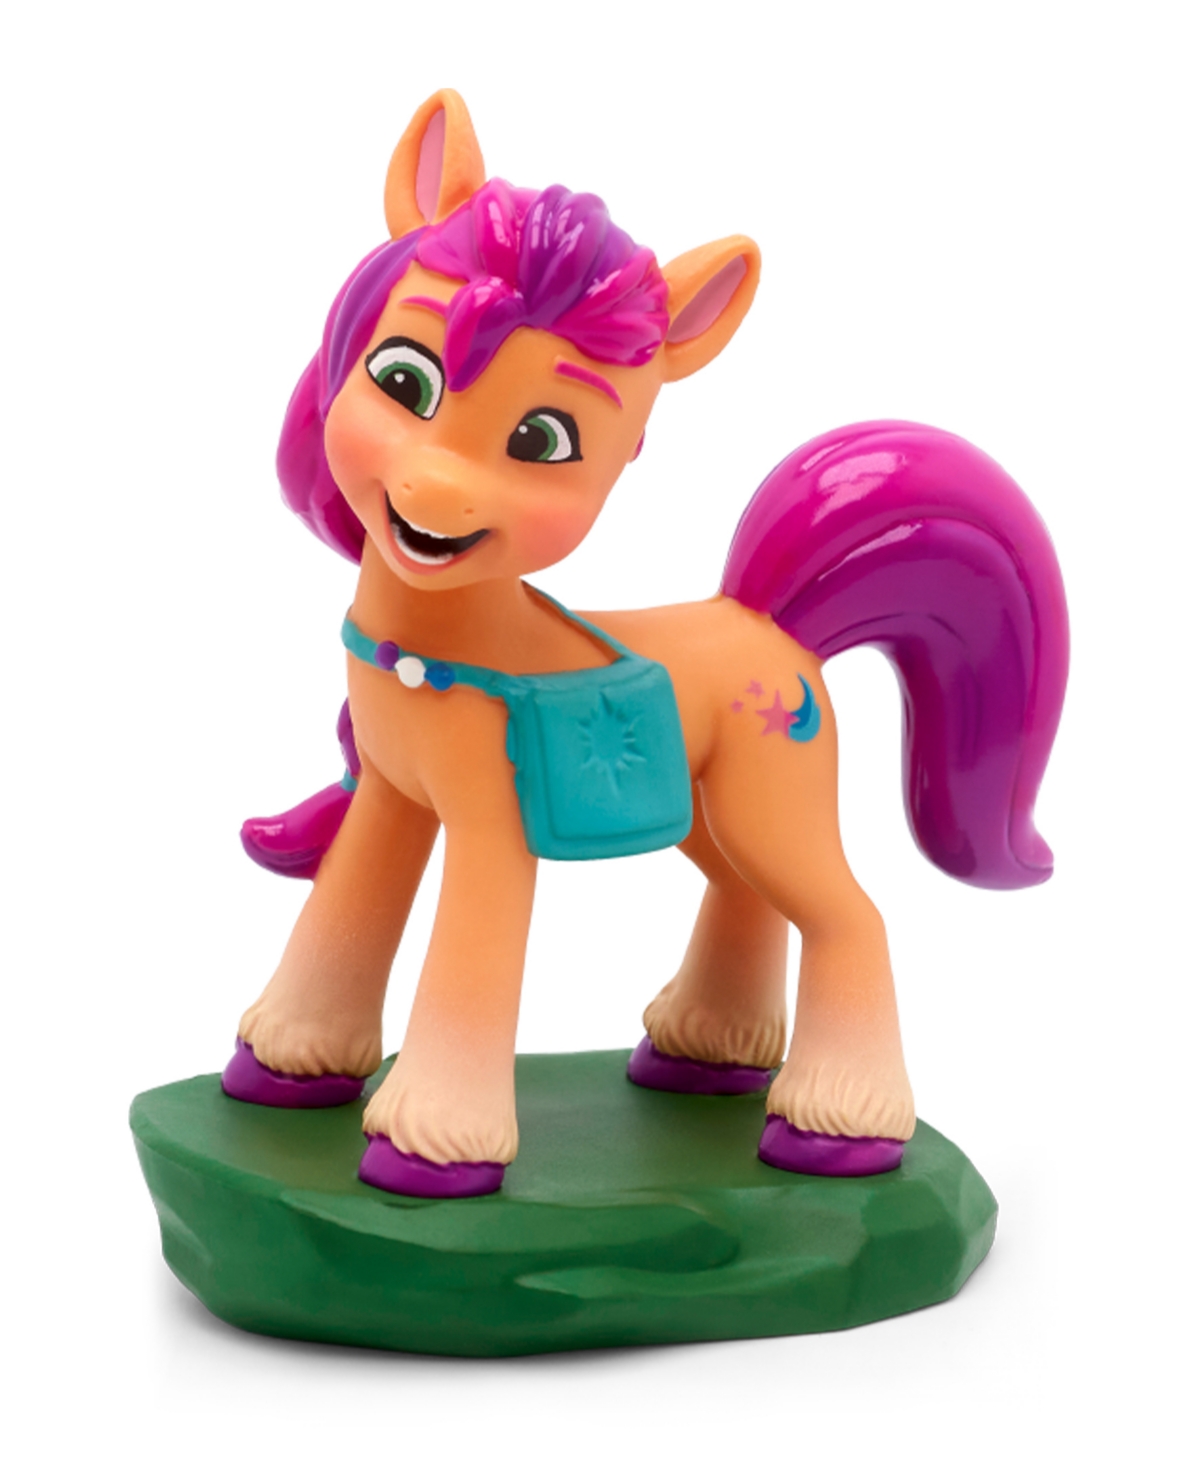 Tonies My Little Pony Audio Play Figurine In No Color